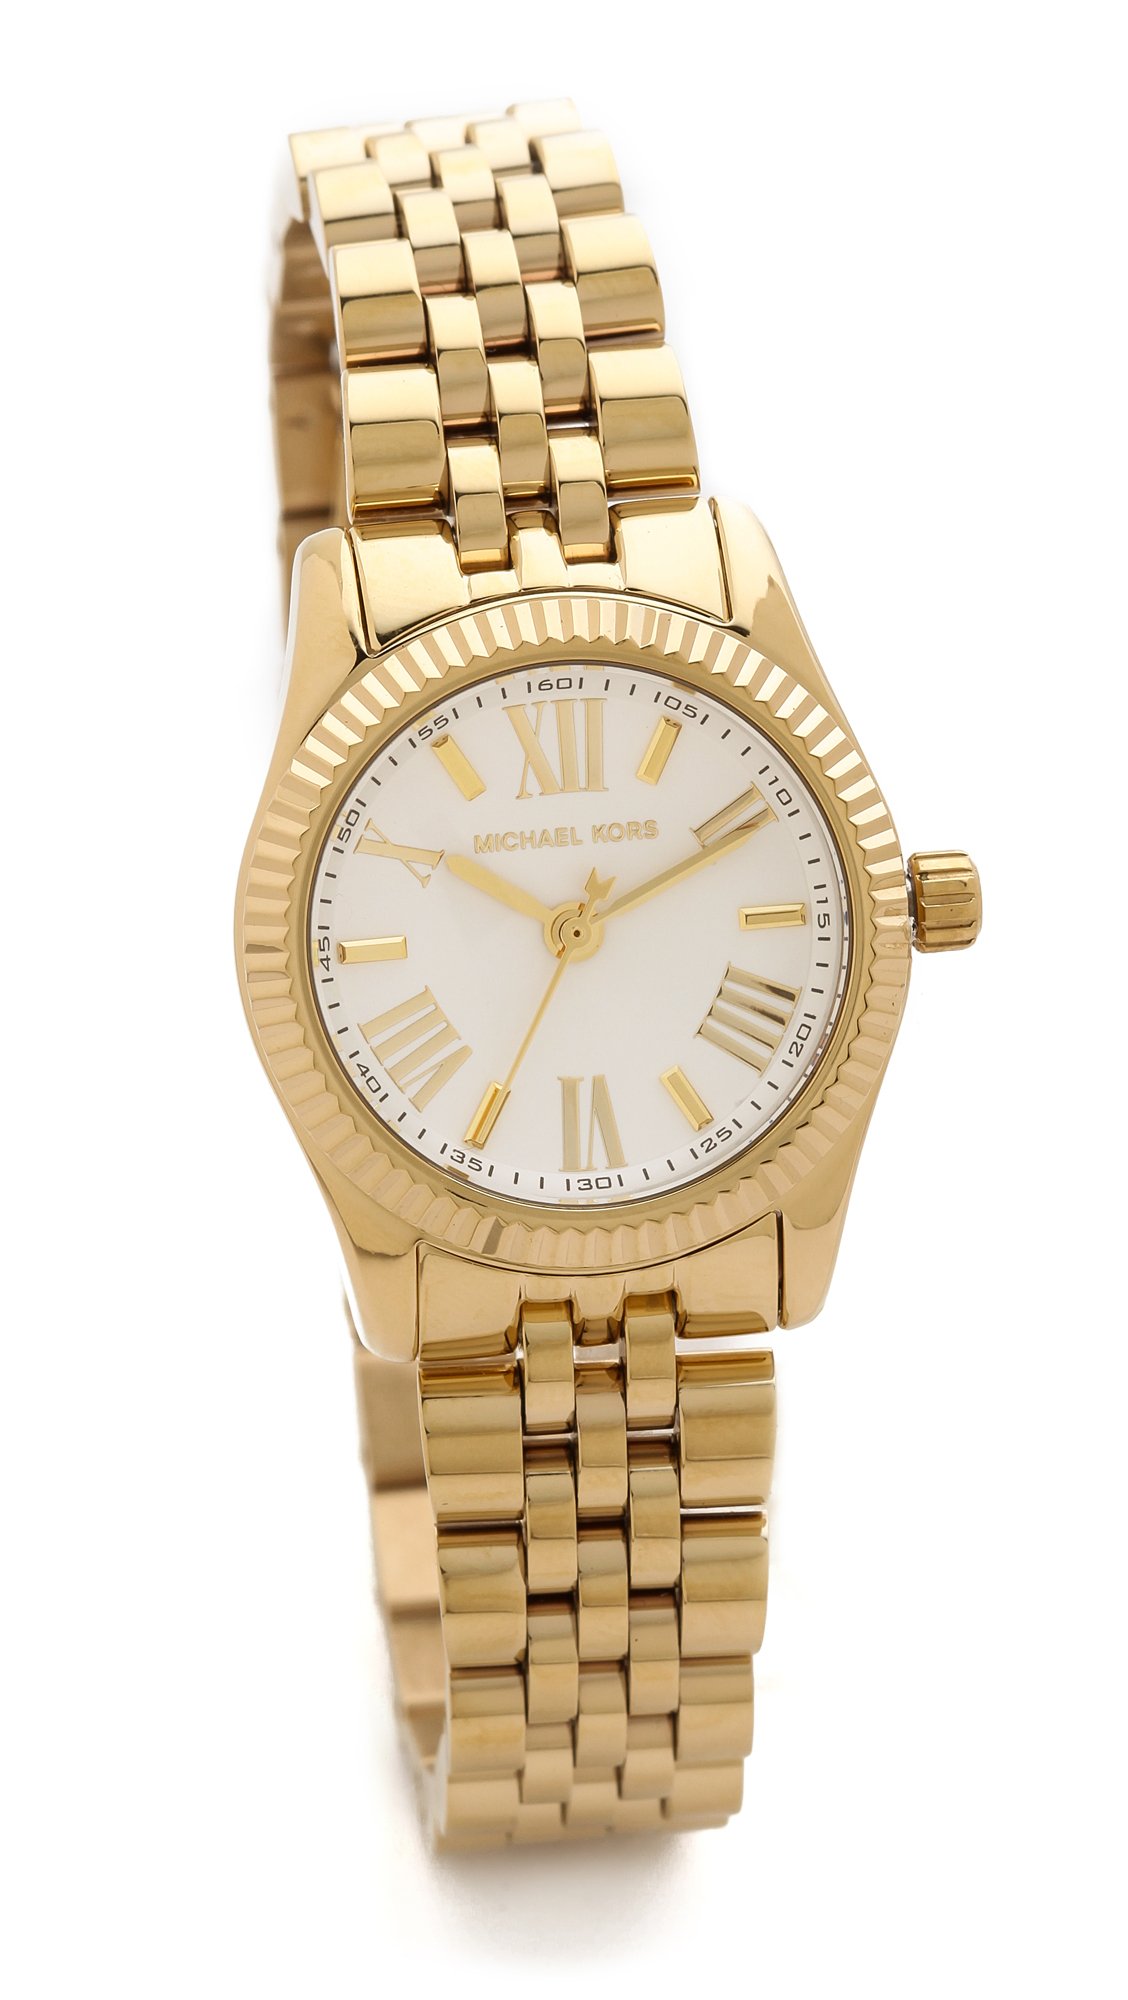 MICHAEL KORS Gold Color Womens Watch MK6356 Prices  Features in Egypt  Free Home Delivery Cairo Sales Stores